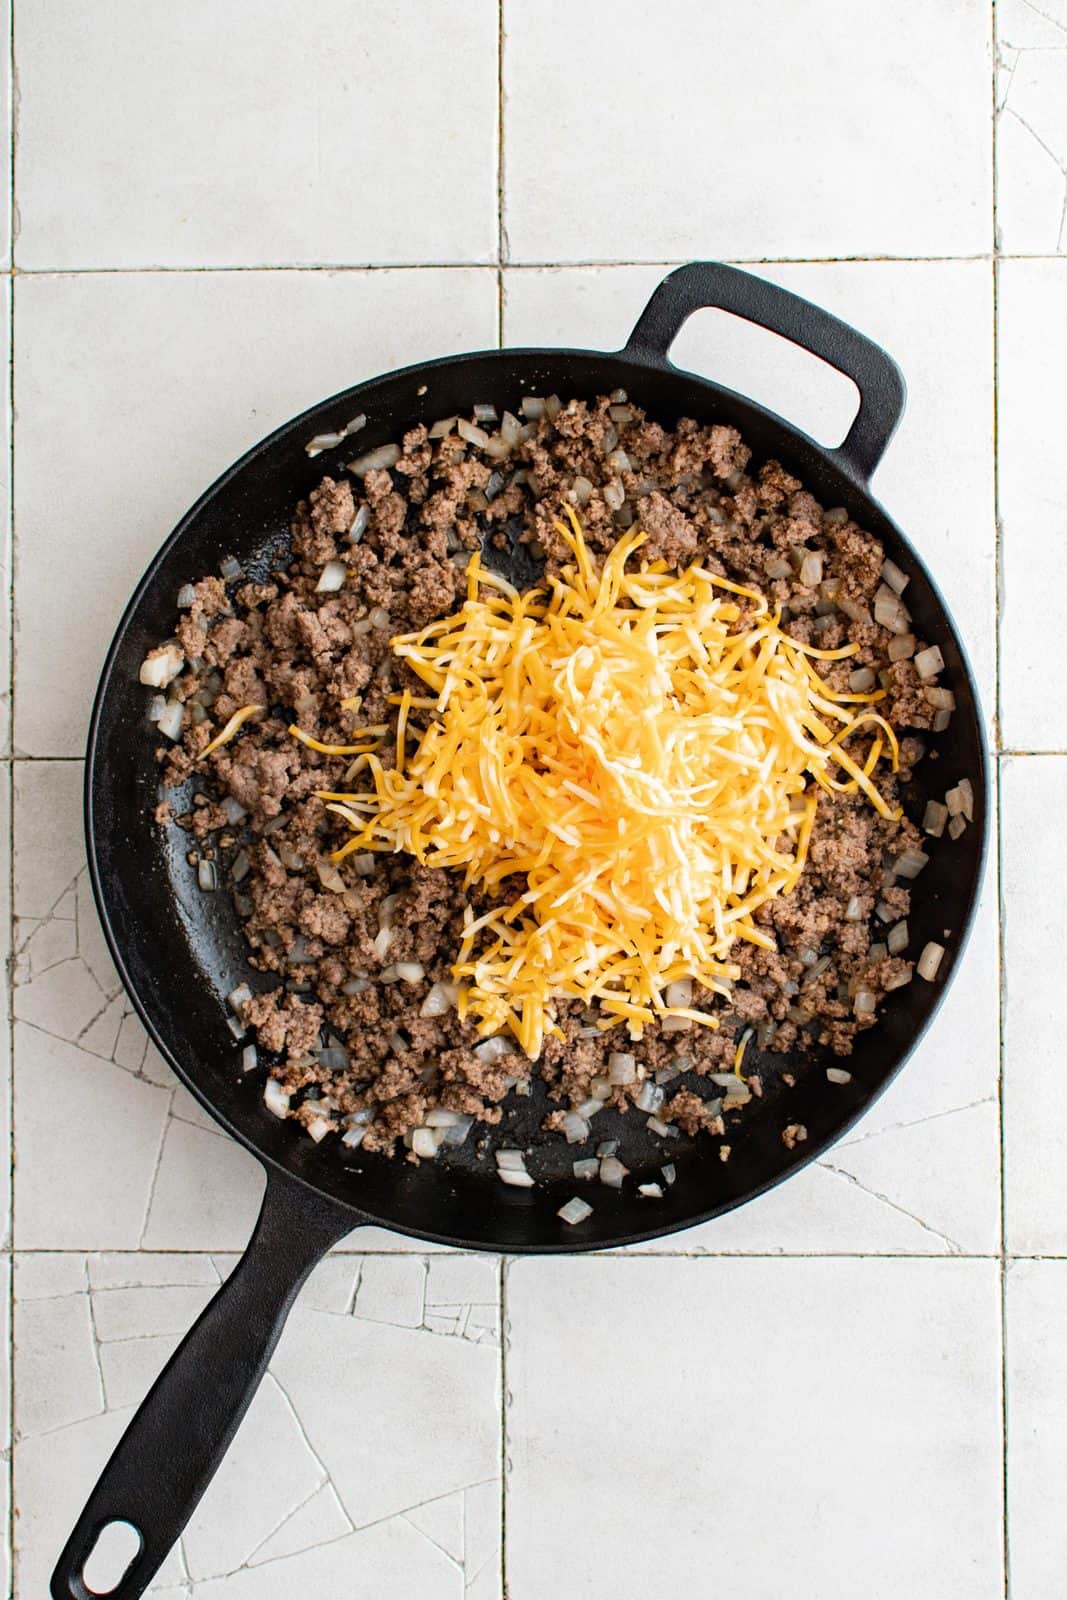 Shredded cheese added to ground beef mixture.